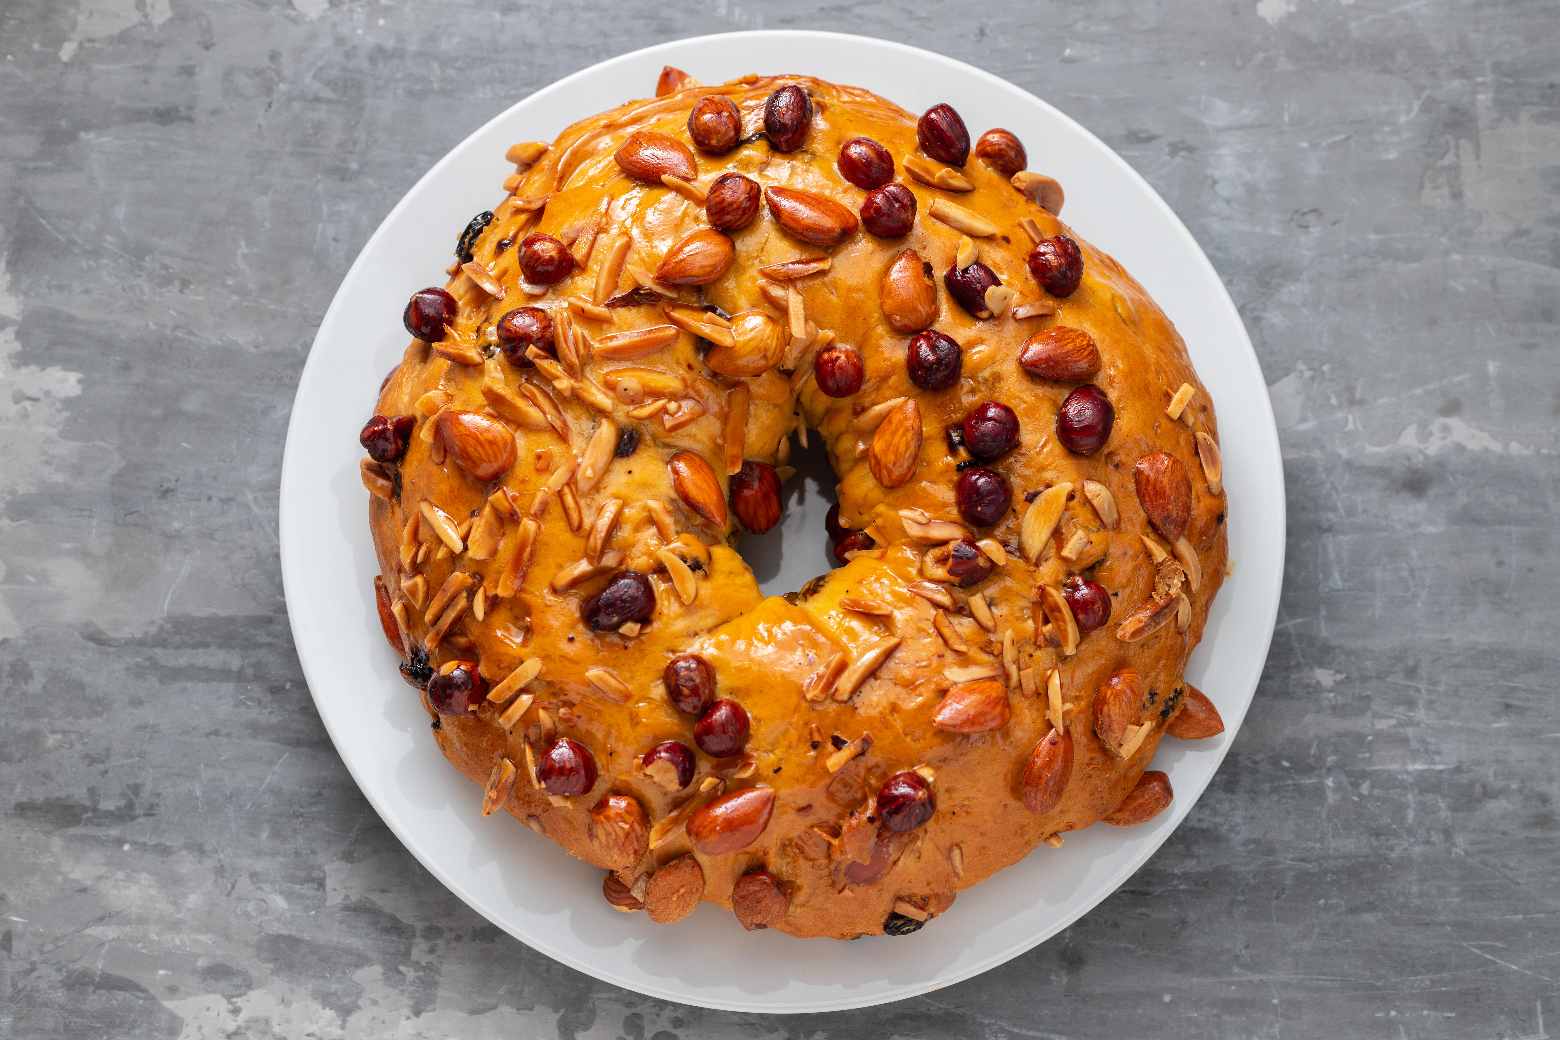 Best Bolo Rei Recipe - How to Make Portuguese Christmas King's Cake